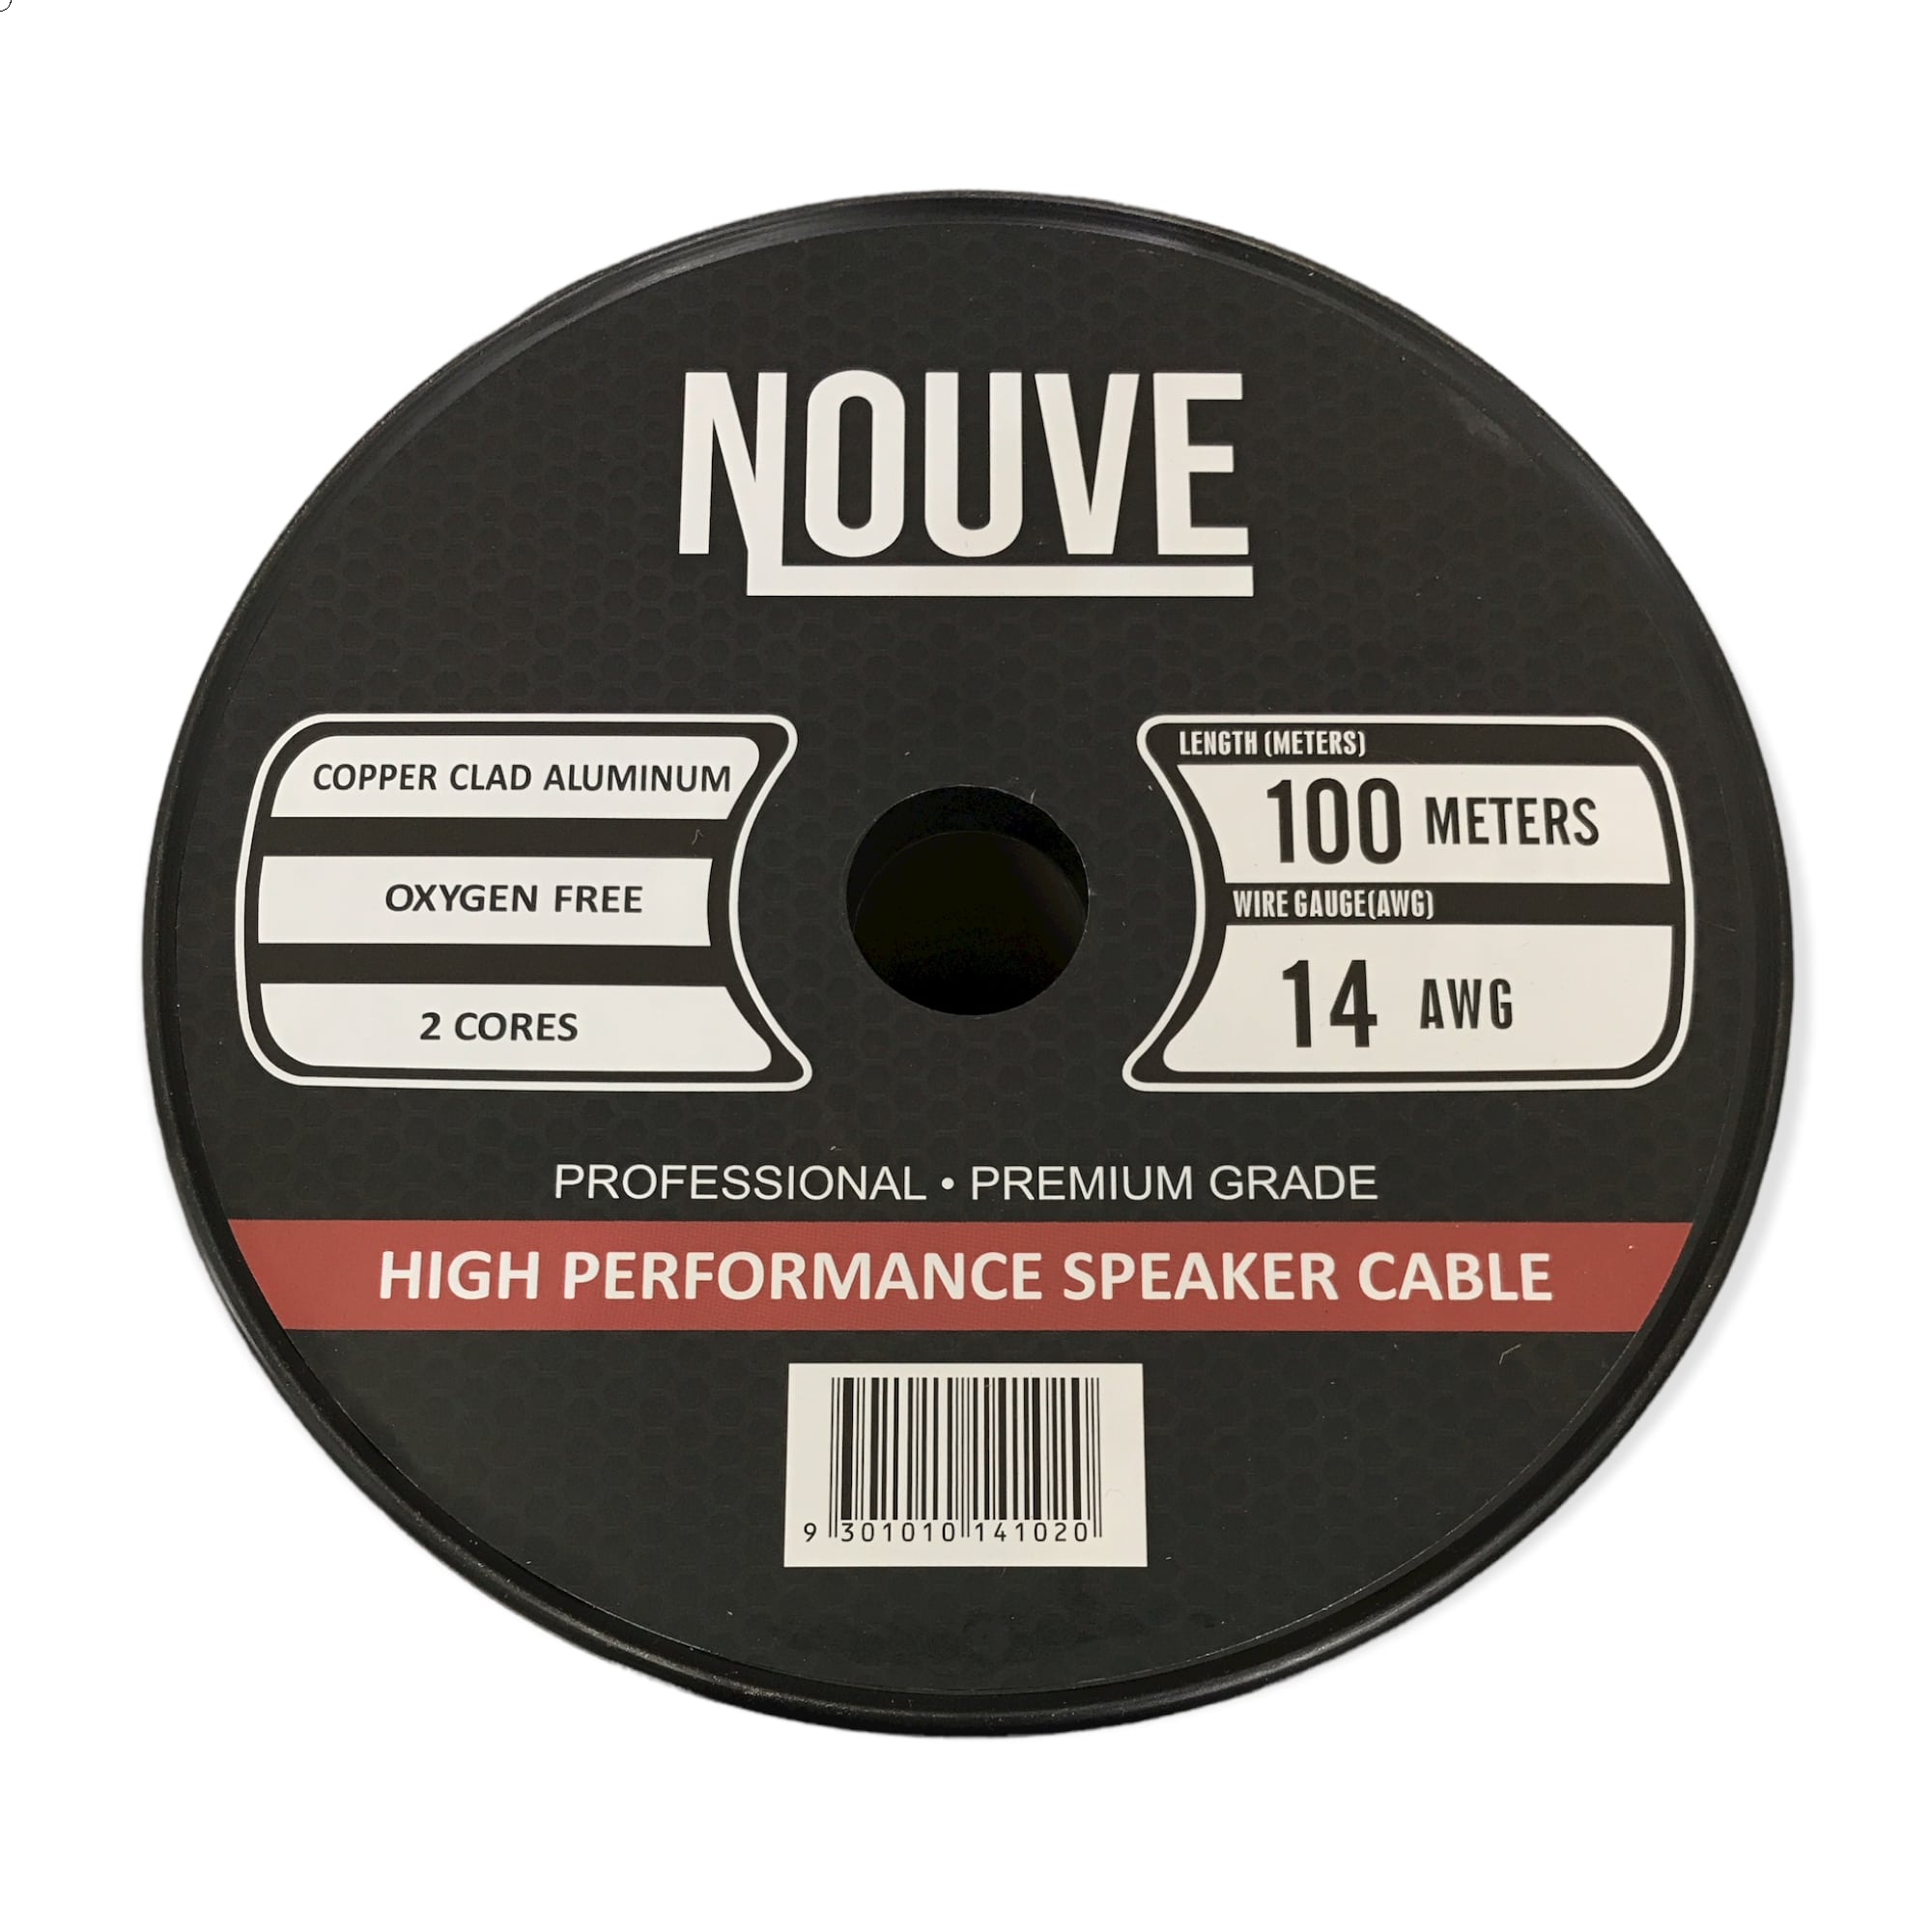 14 awg speaker cable cca 100m cover